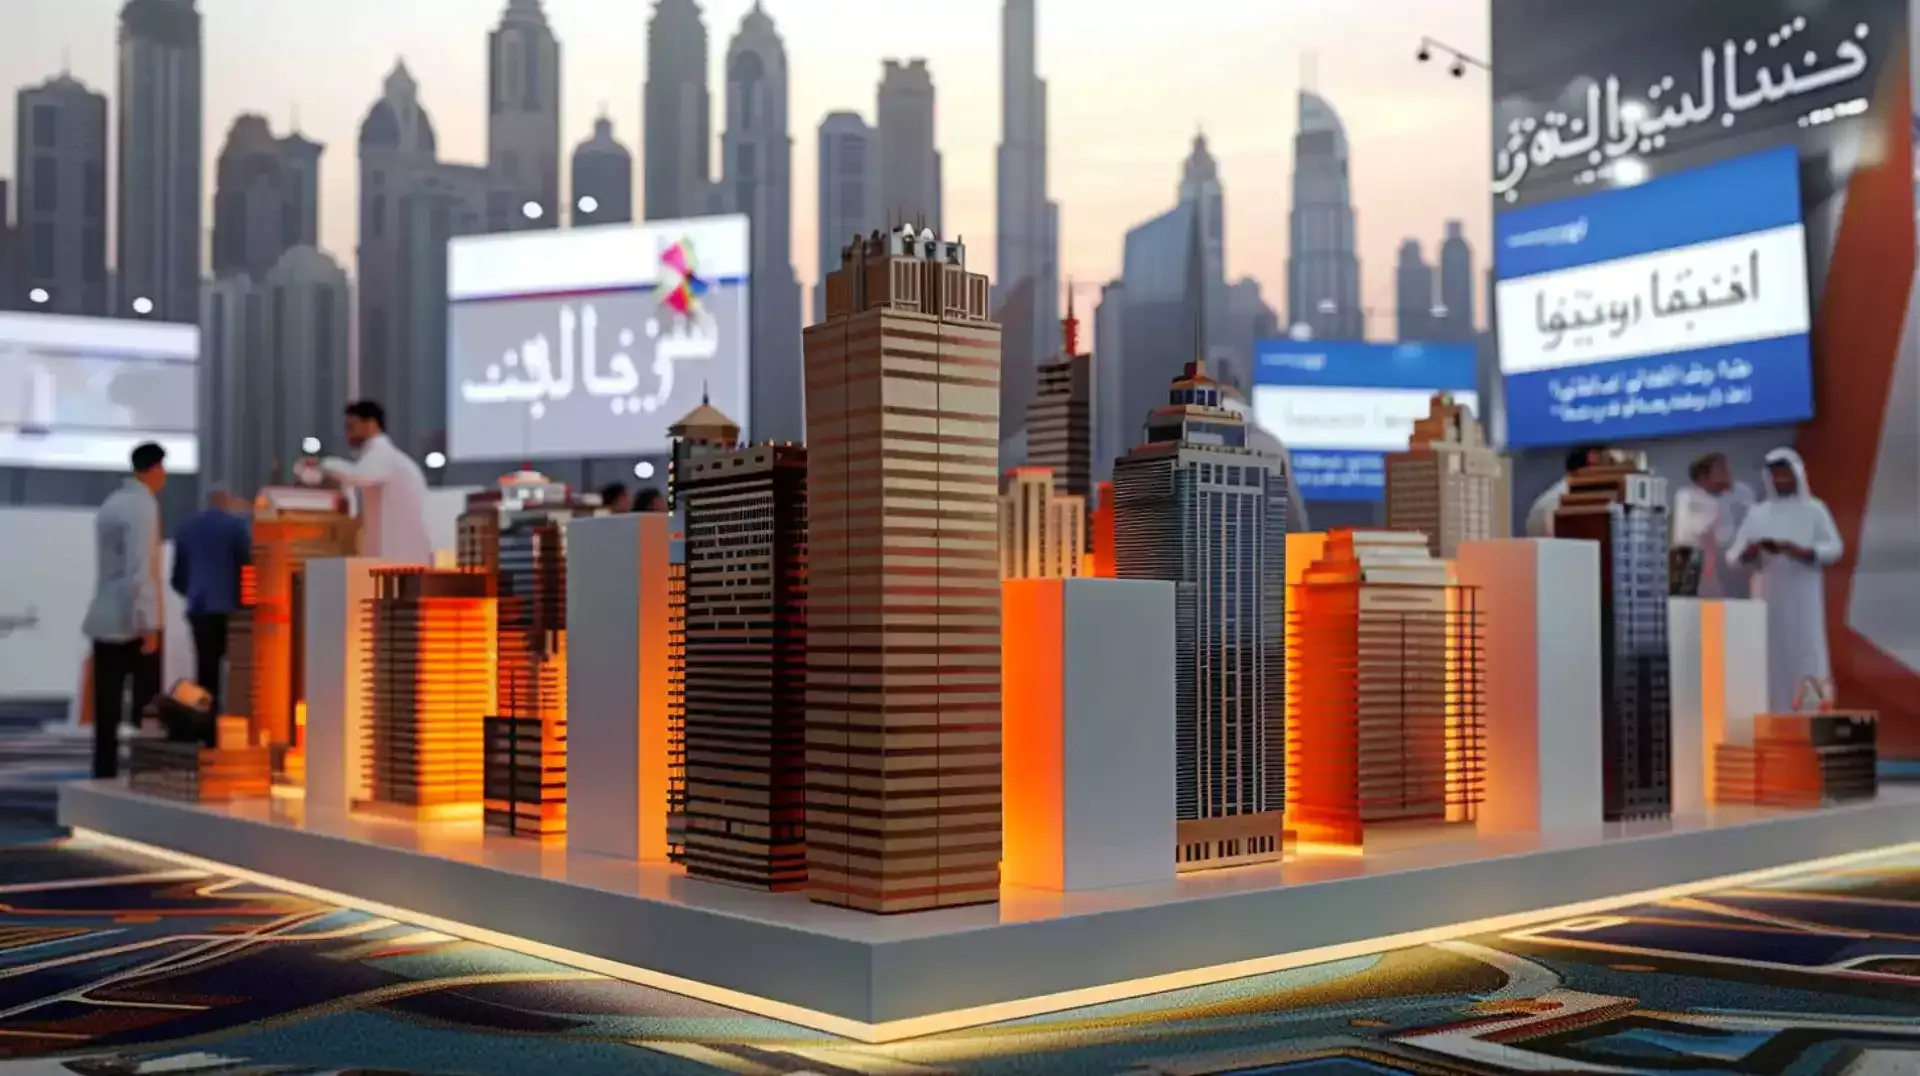 Visual representation highlighting the opportunities and innovation within Dubai's business environment